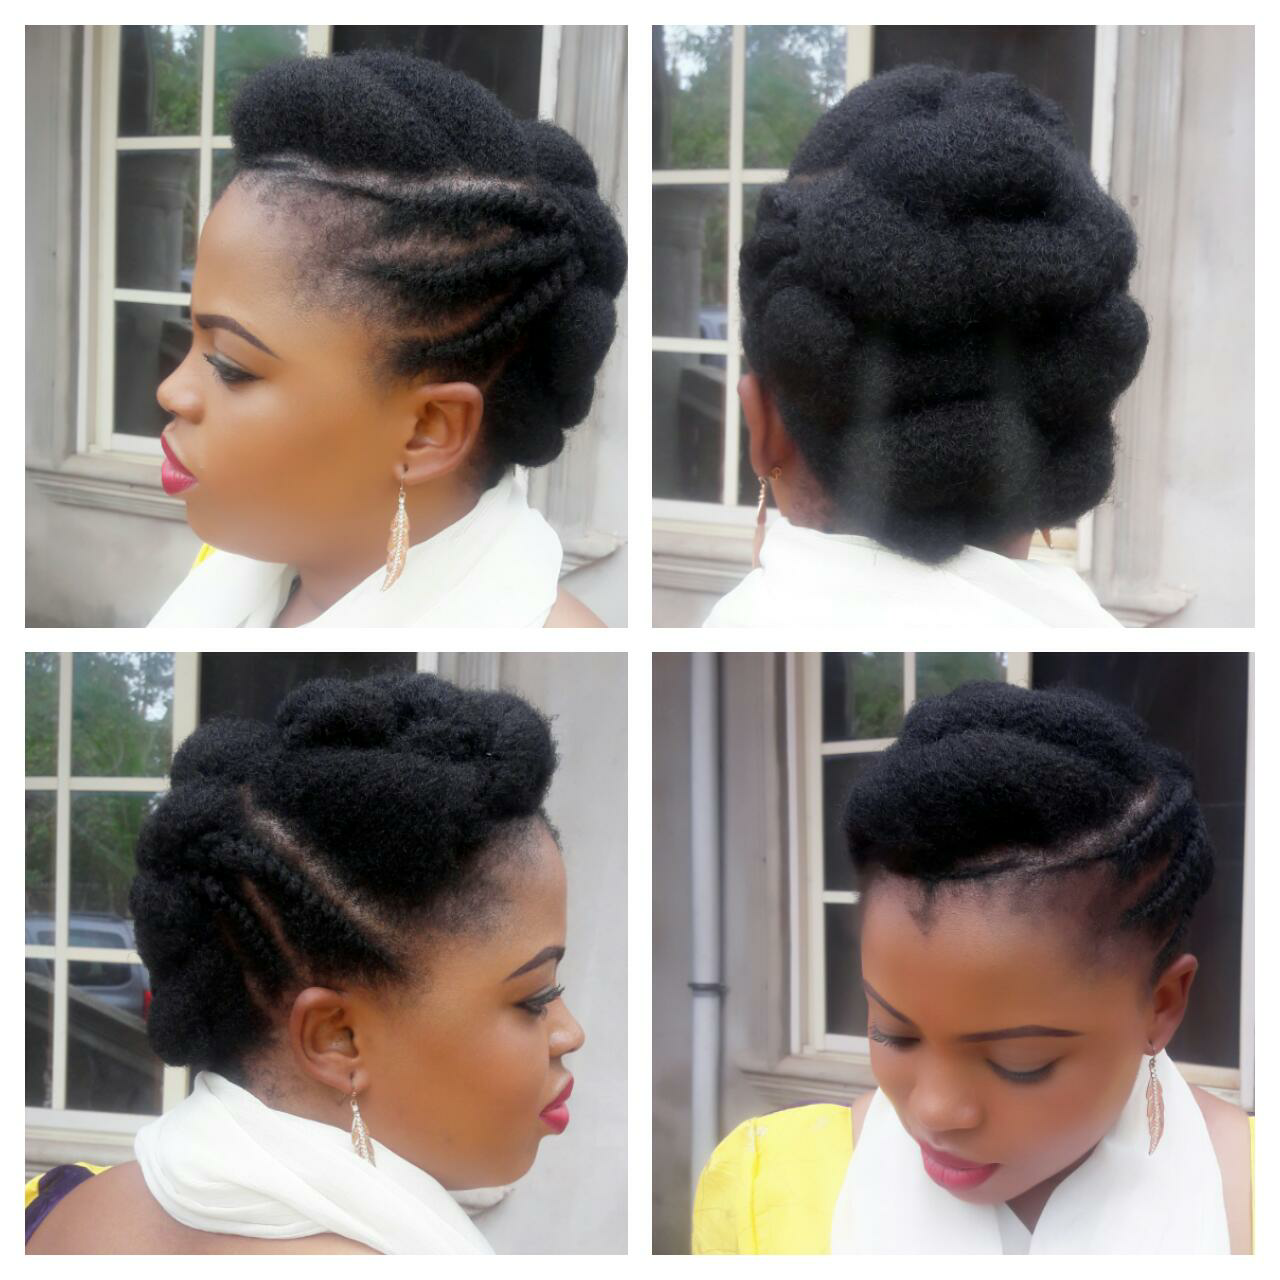 Natural Hair Bride: Hairstyle Options for Her Big Day